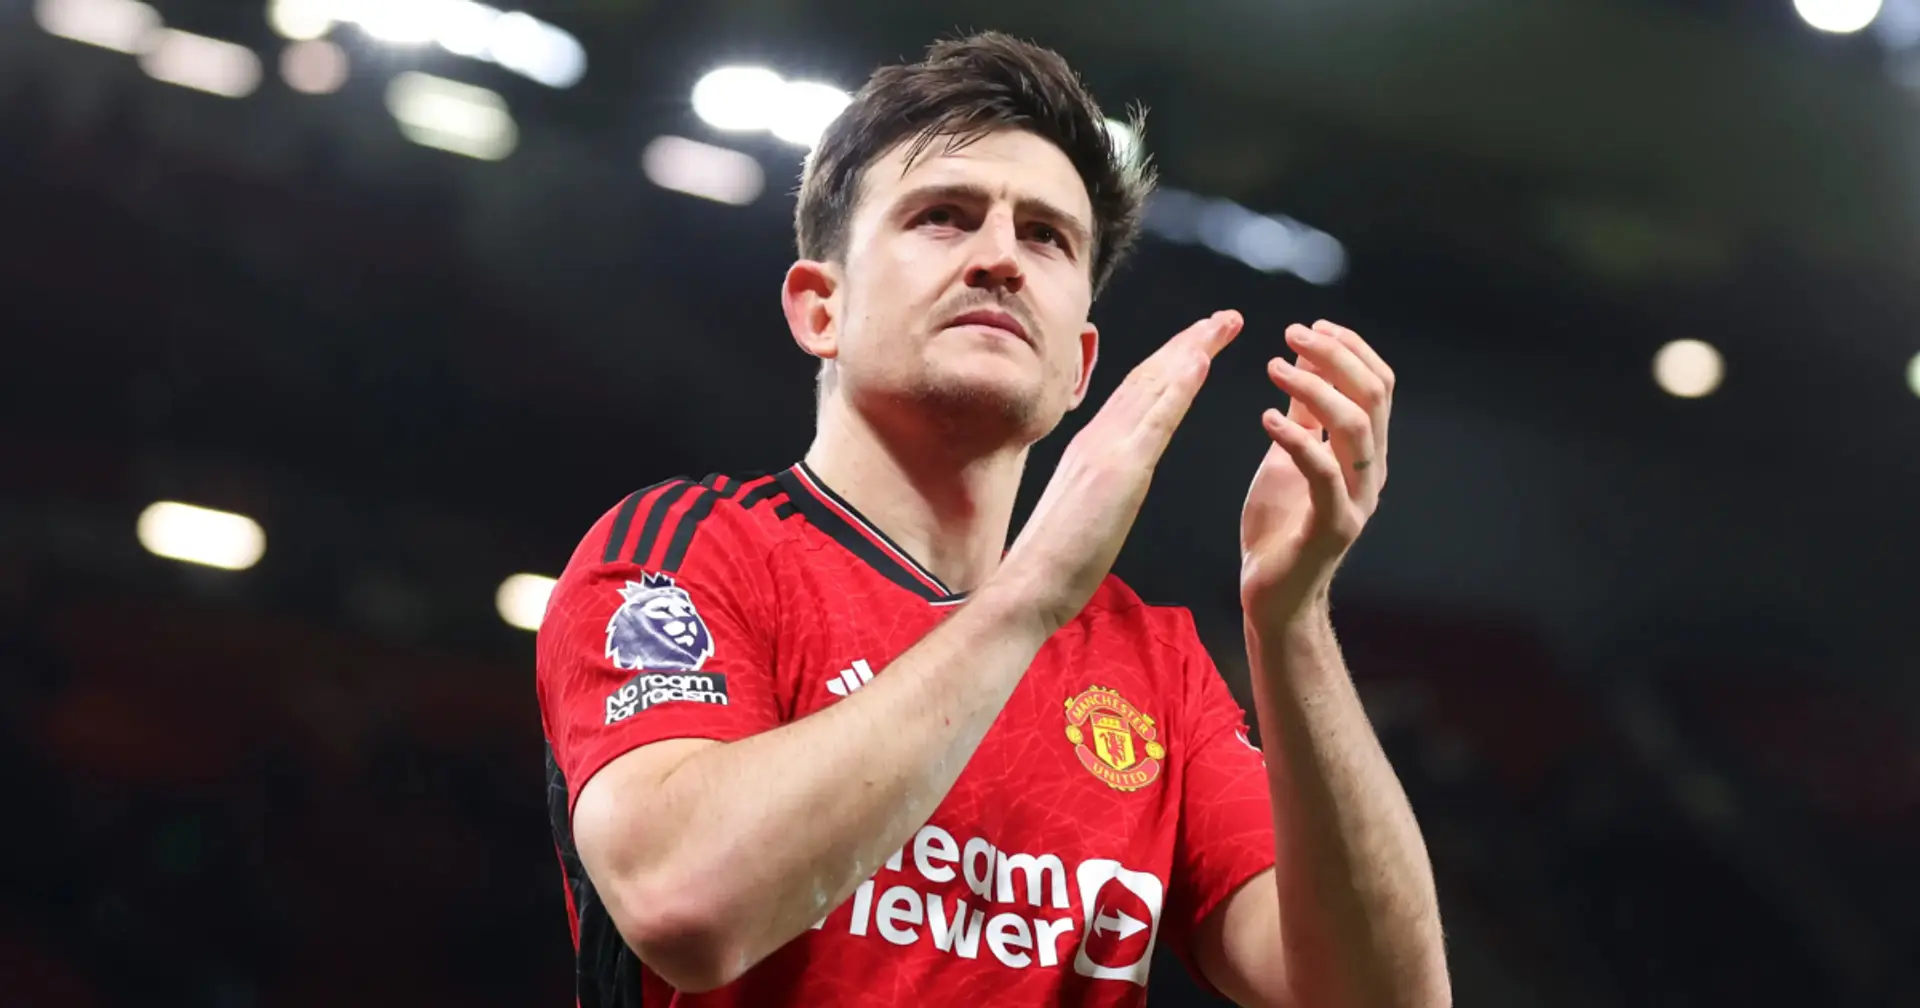 'Contender for Player of the Year': Man United fans happy about news on Harry Maguire's future